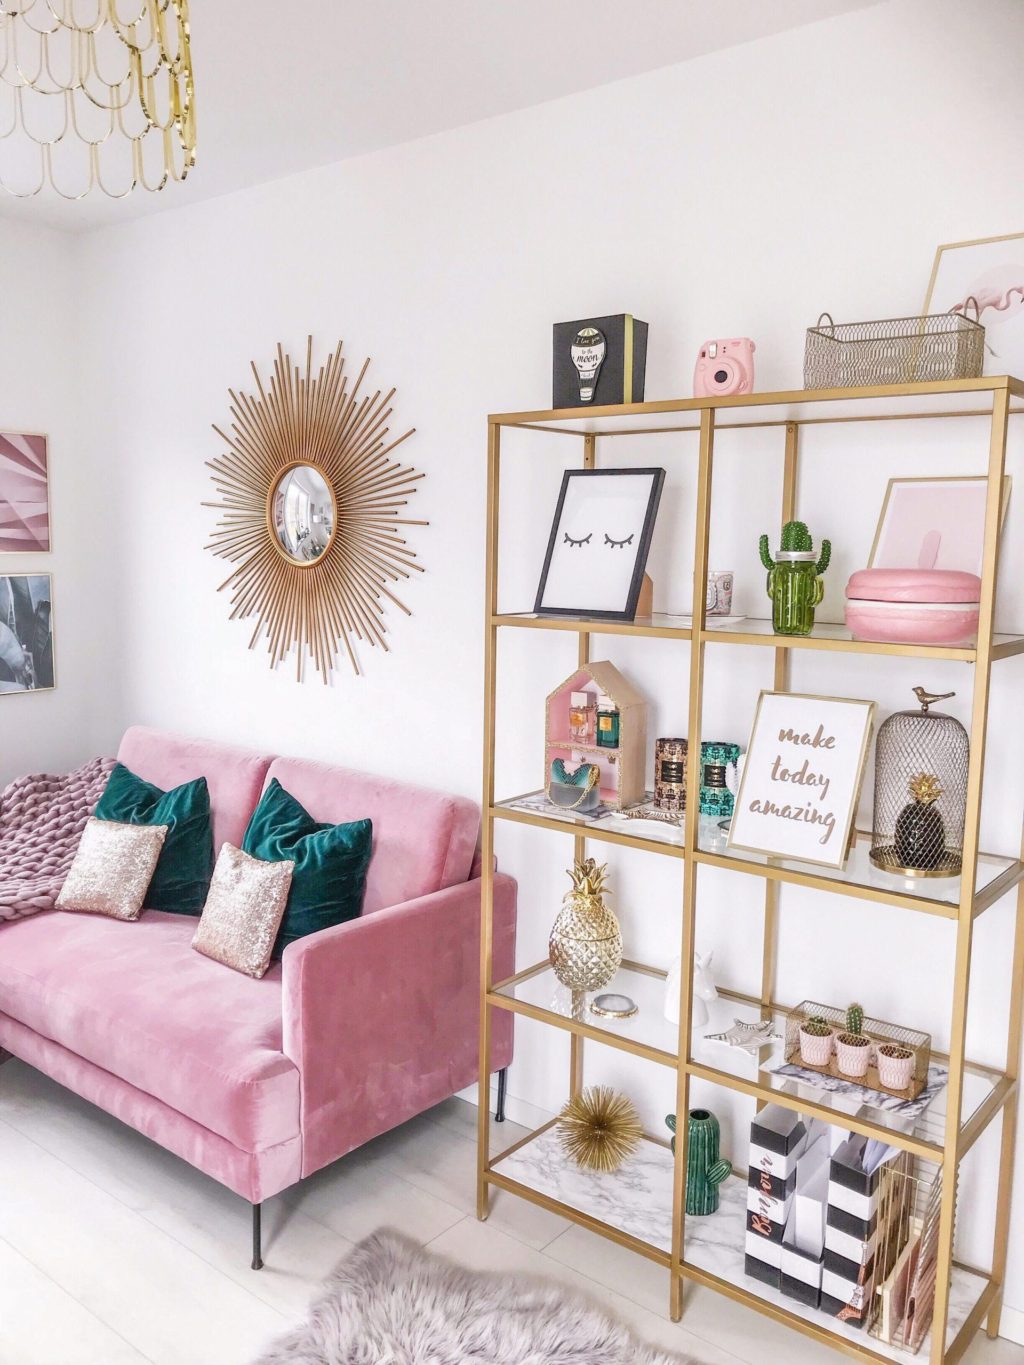 Soft Pinks 2 Top 10 Outdated Home Decorating Trends to Avoid - 5